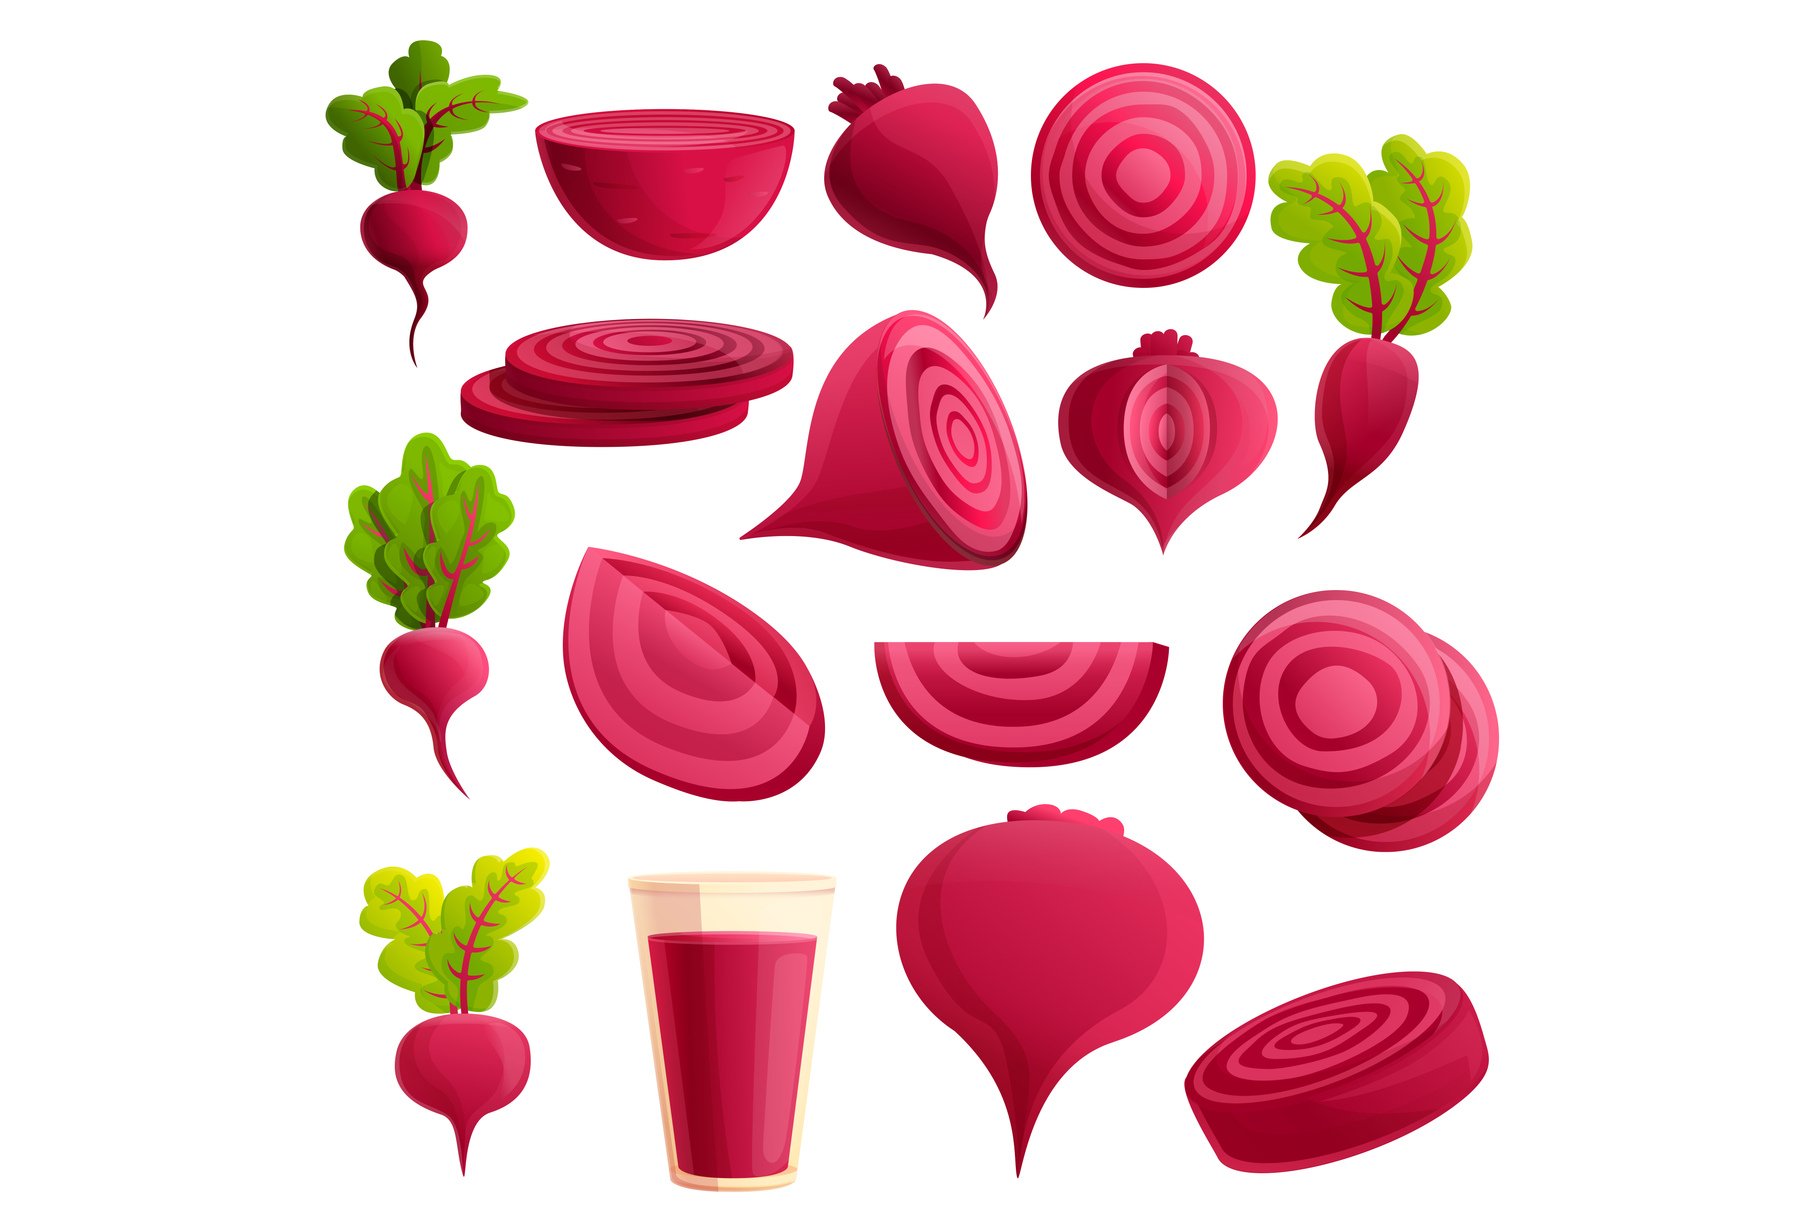 Some parts and products of beetroots.